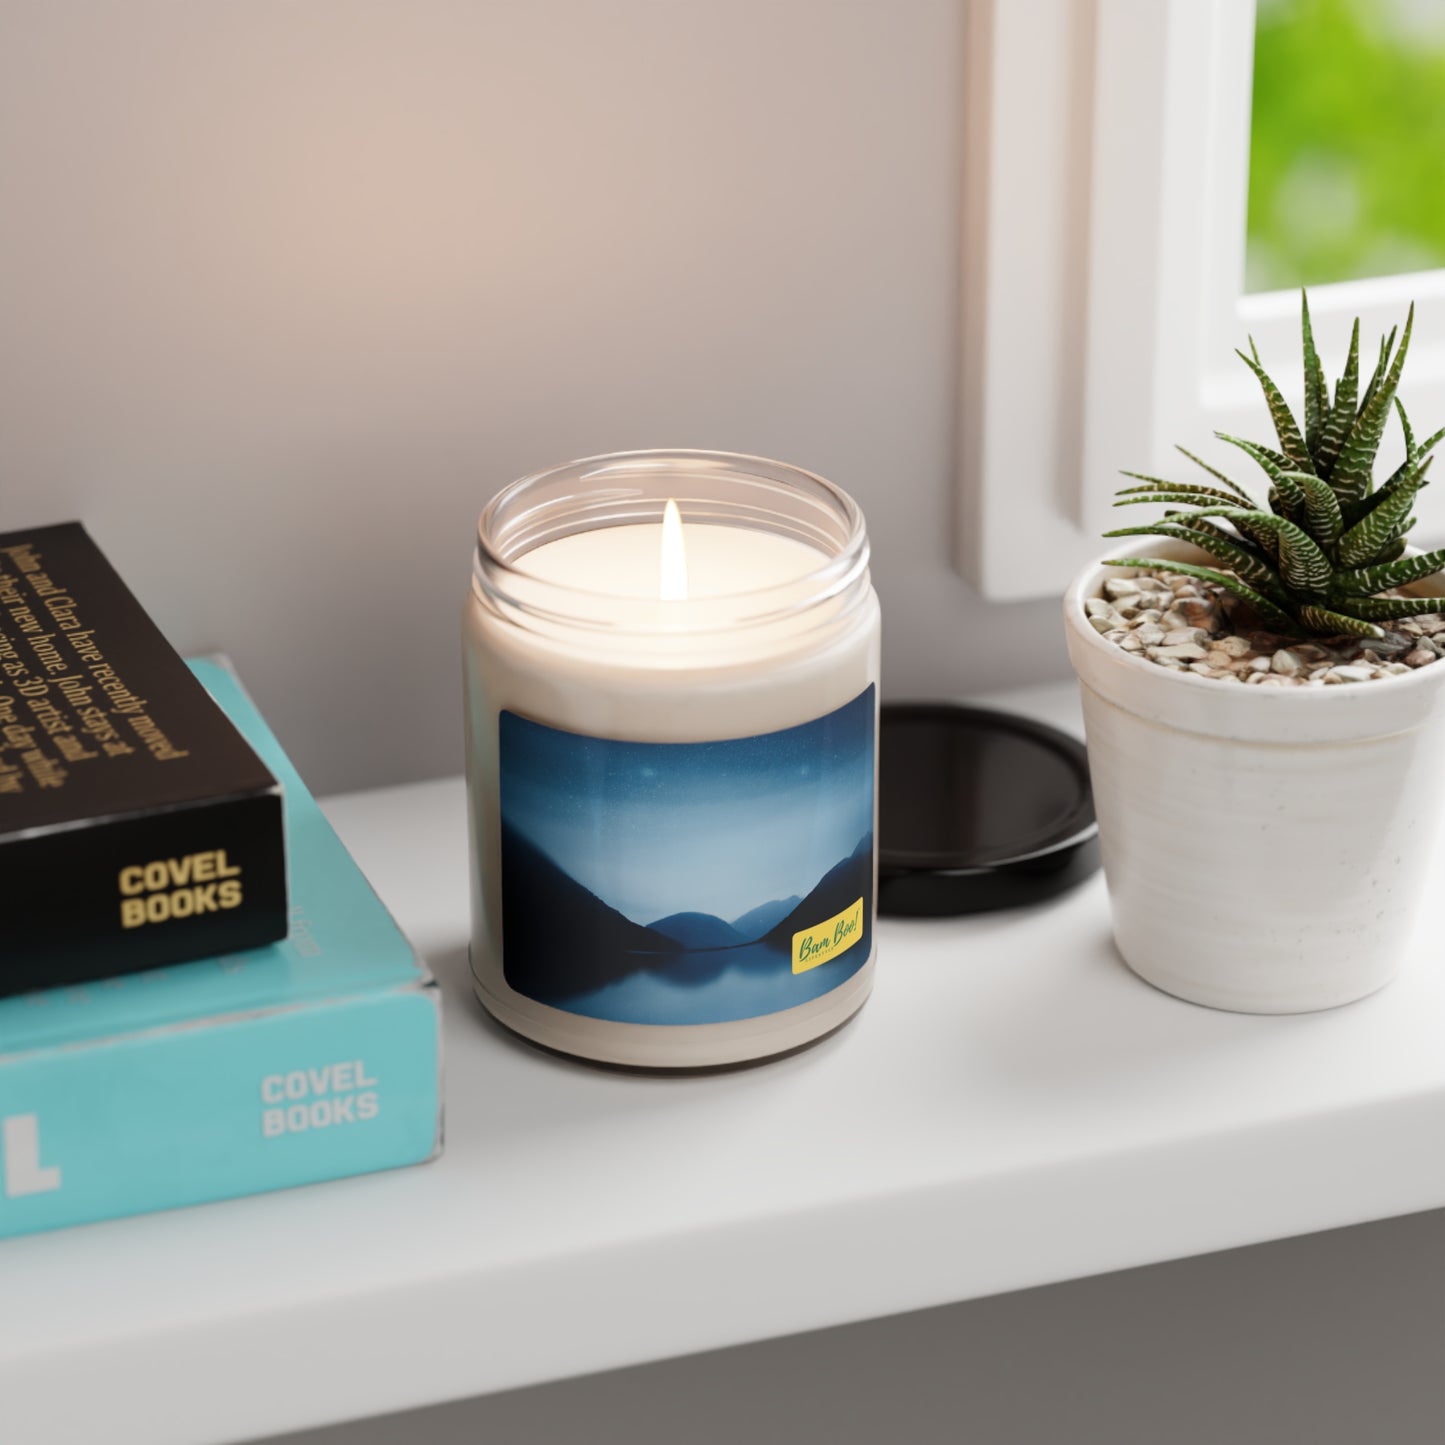 The Wonders of Phenomenal Nature - Bam Boo! Lifestyle Eco-friendly Soy Candle